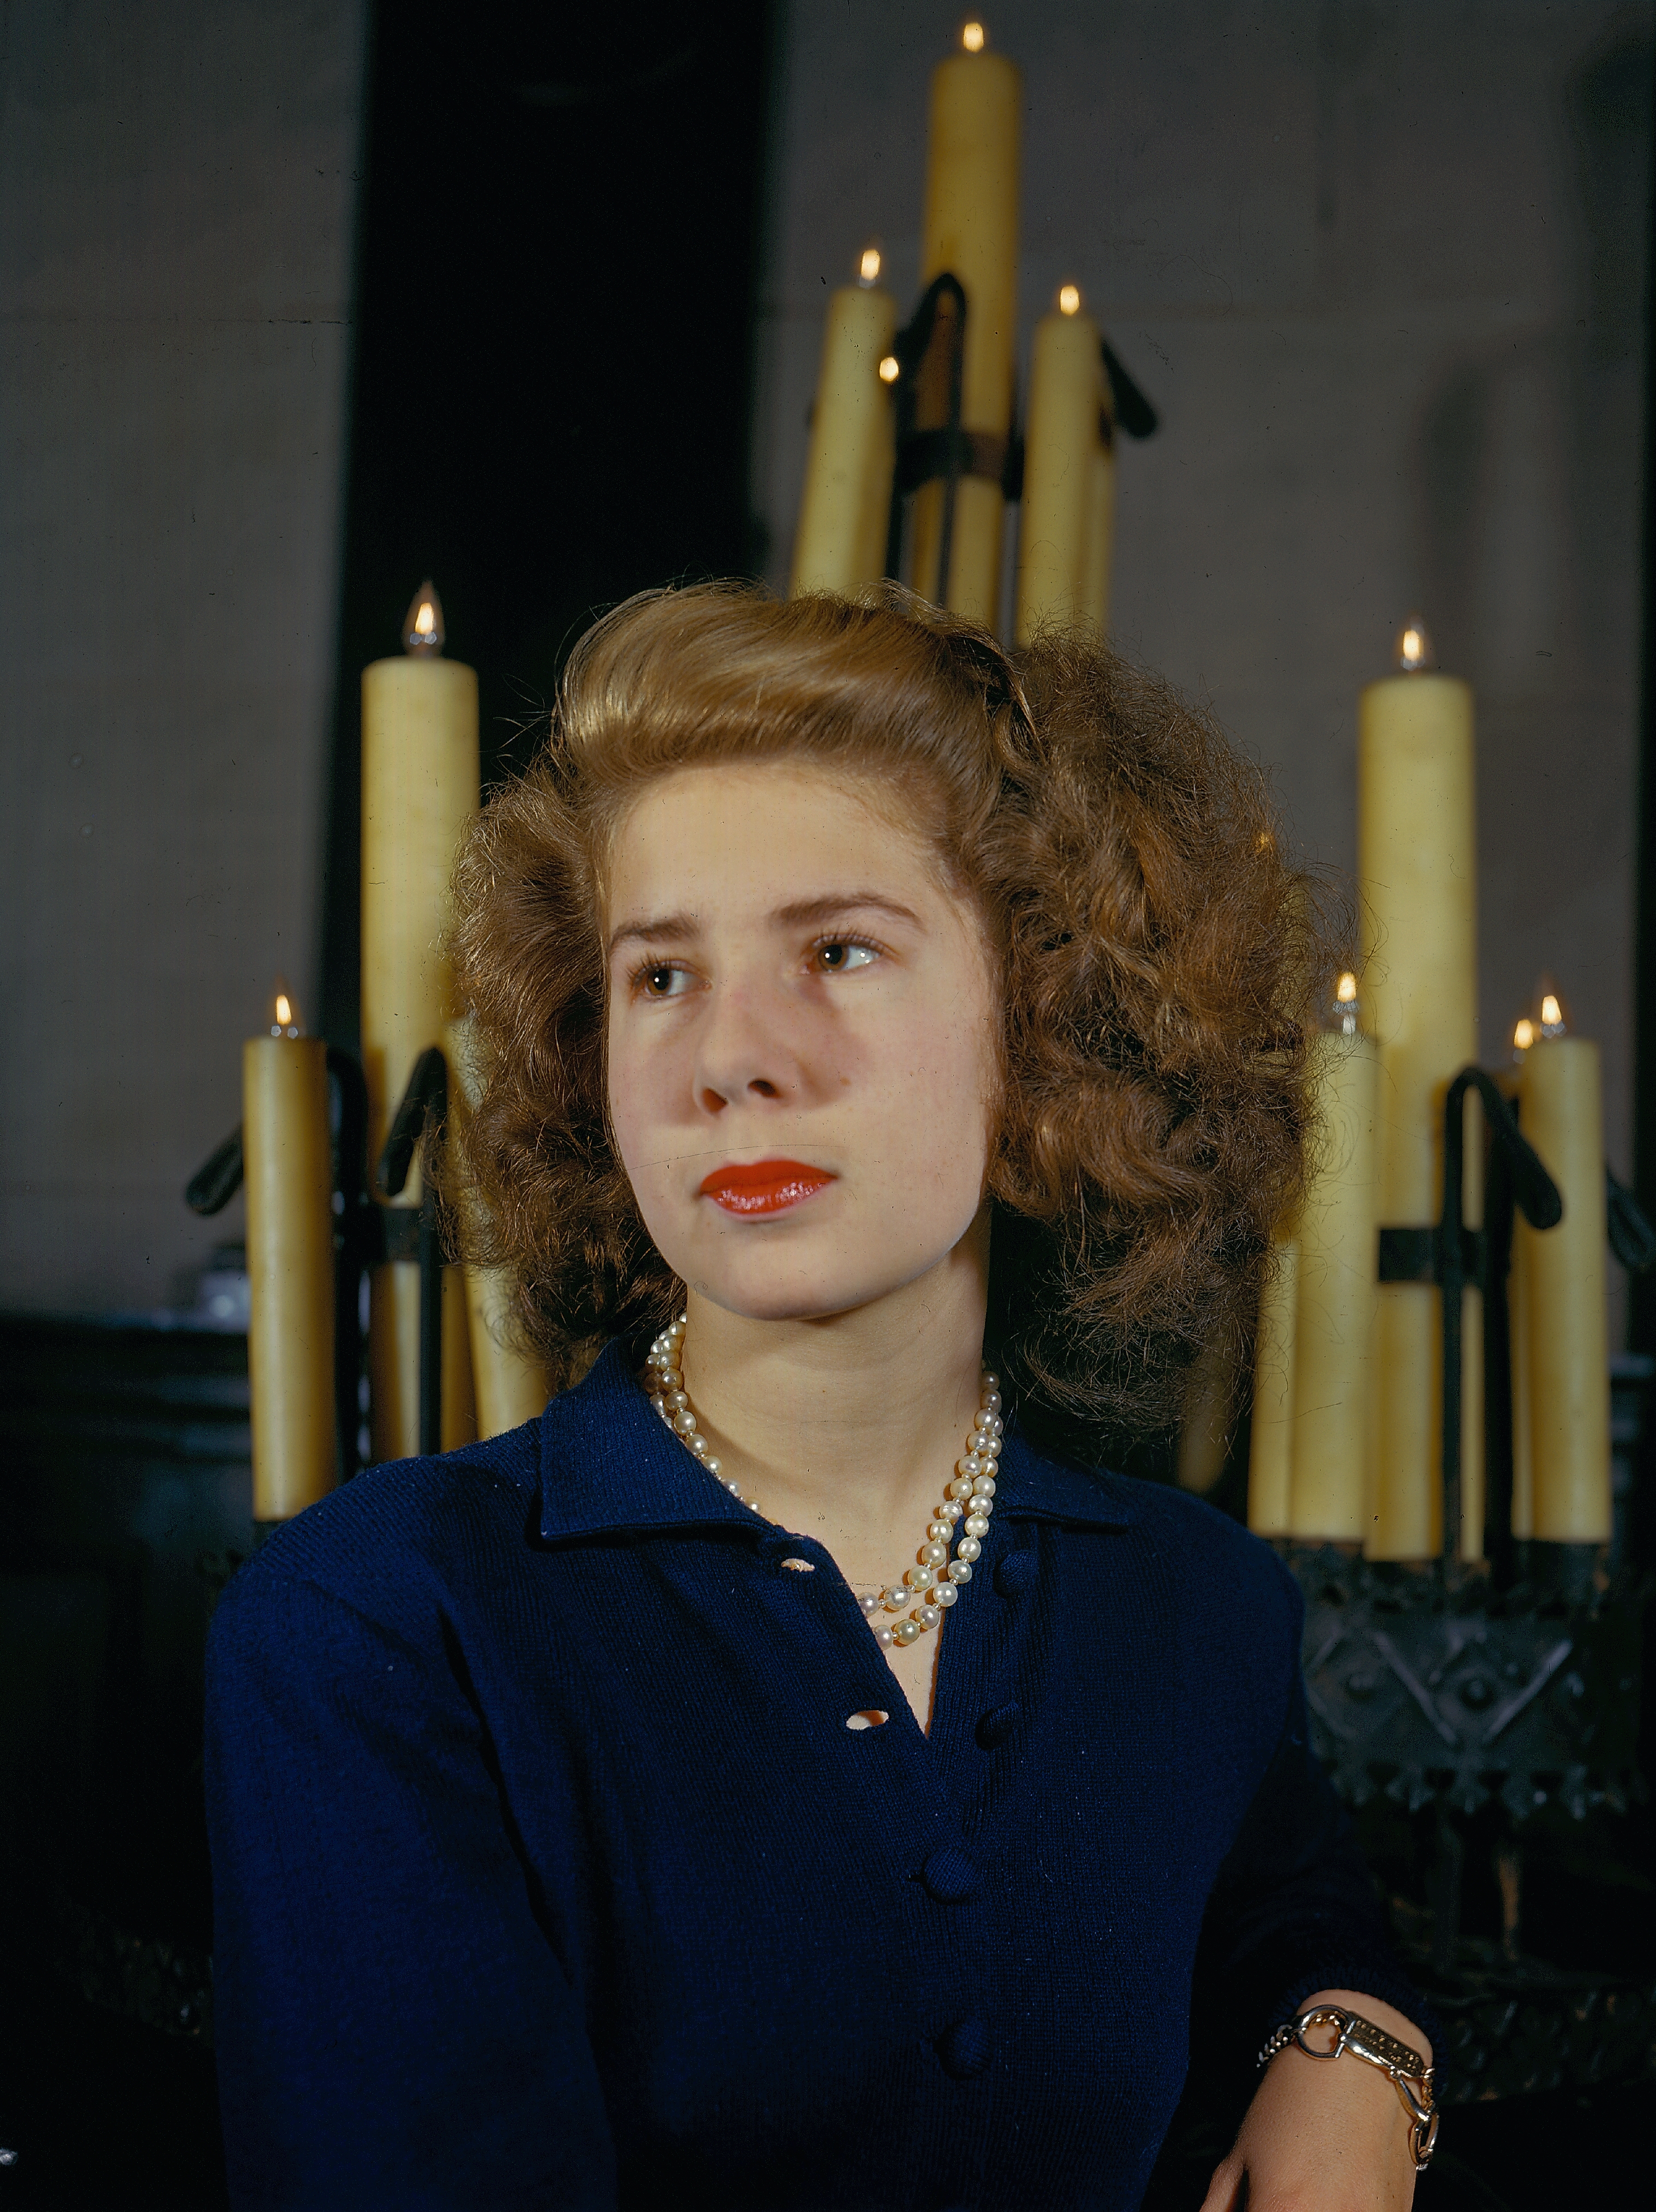 The Duchess of Alba, Maria del Rosario Cayetana Fitz-James Stuart photographed on January 1, 1945 | Source: Getty Images